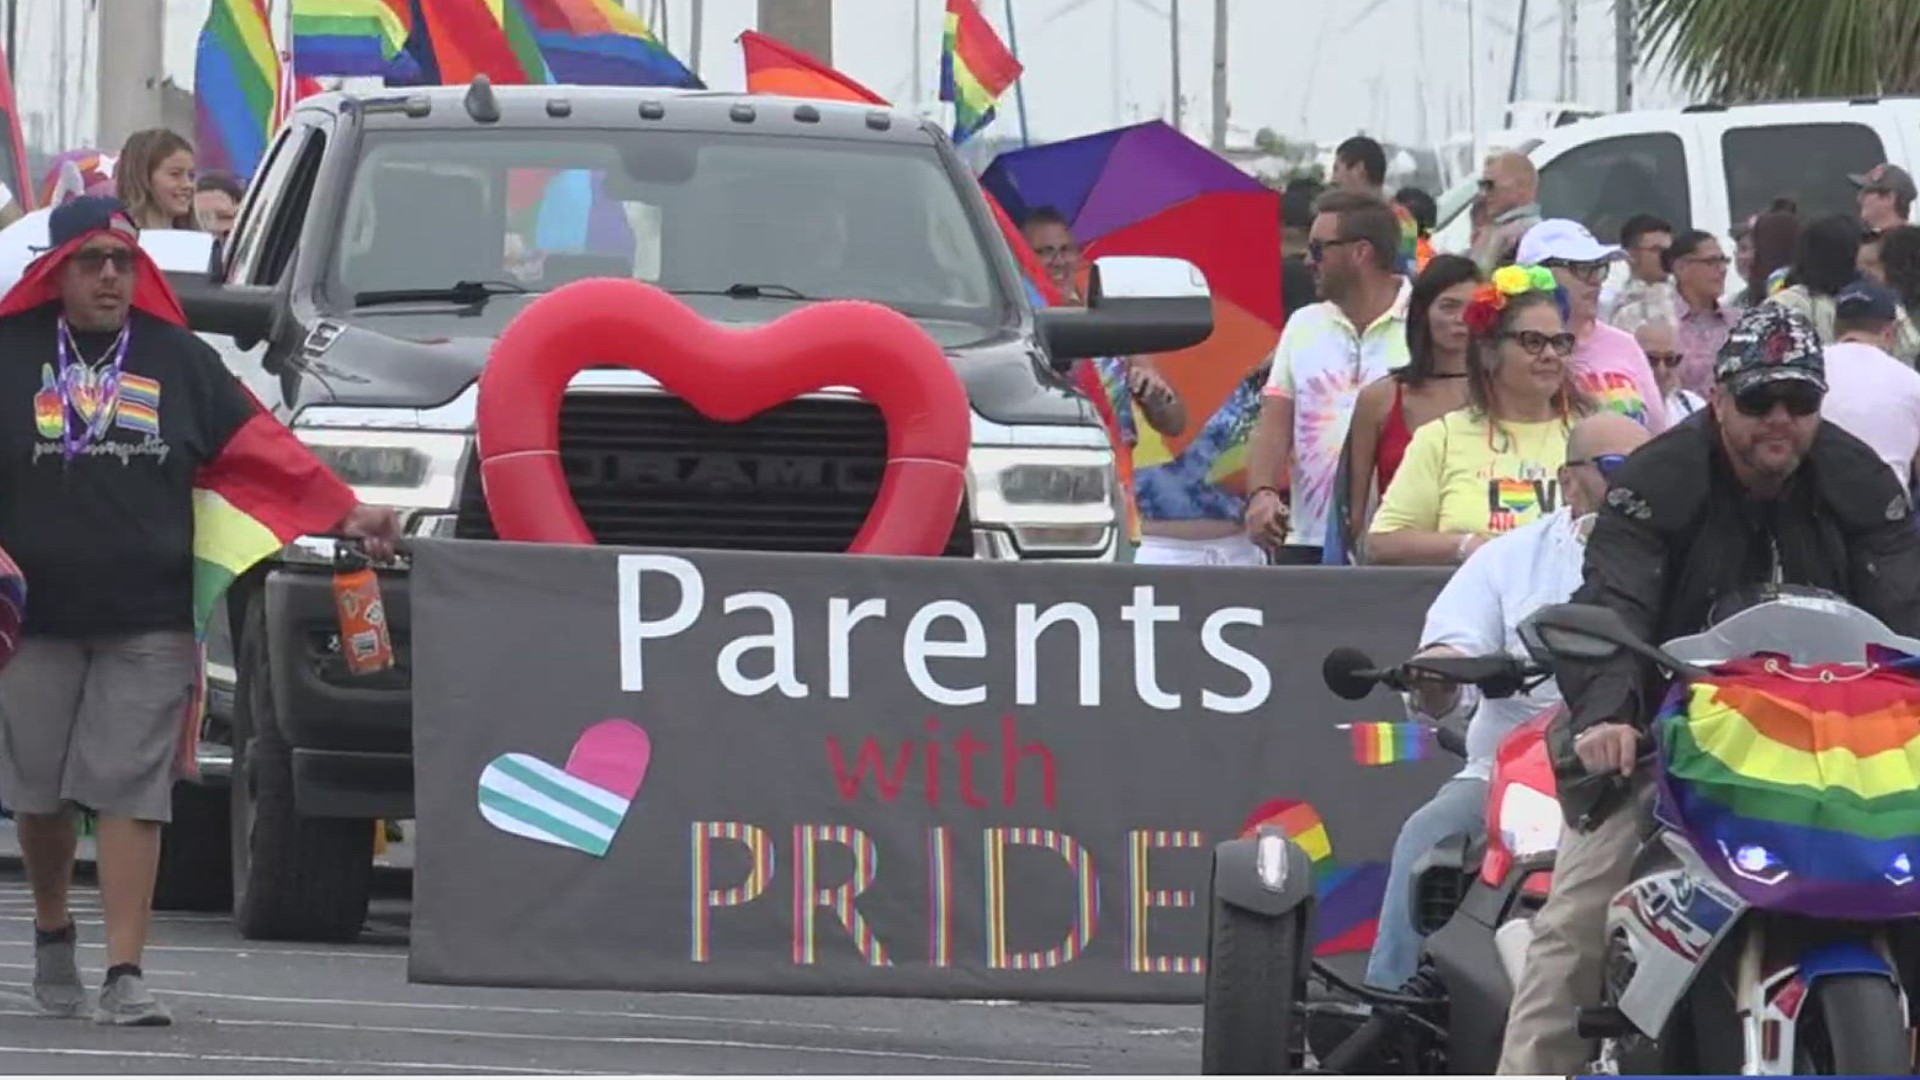 Hundreds of people celebrated LGBTQ+ Pride and history.